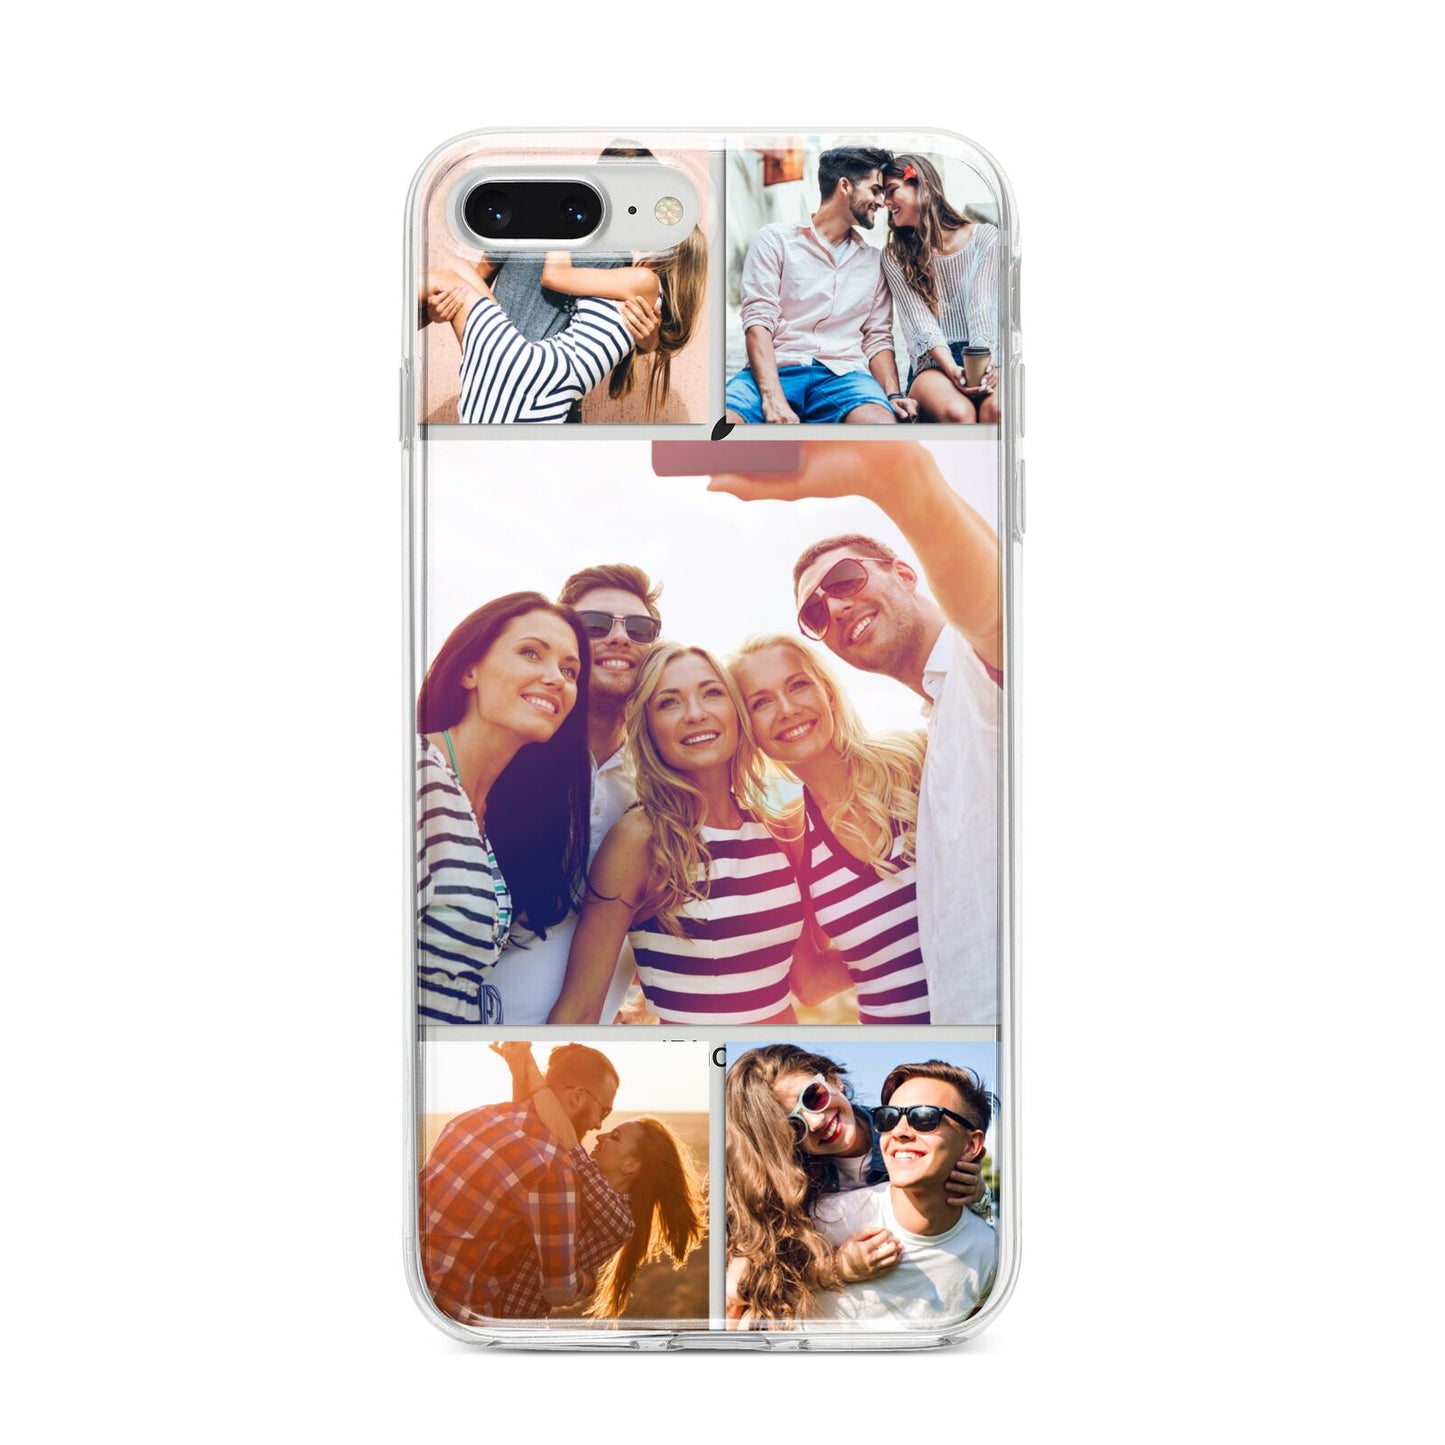 Tile Photo Collage Upload iPhone 8 Plus Bumper Case on Silver iPhone